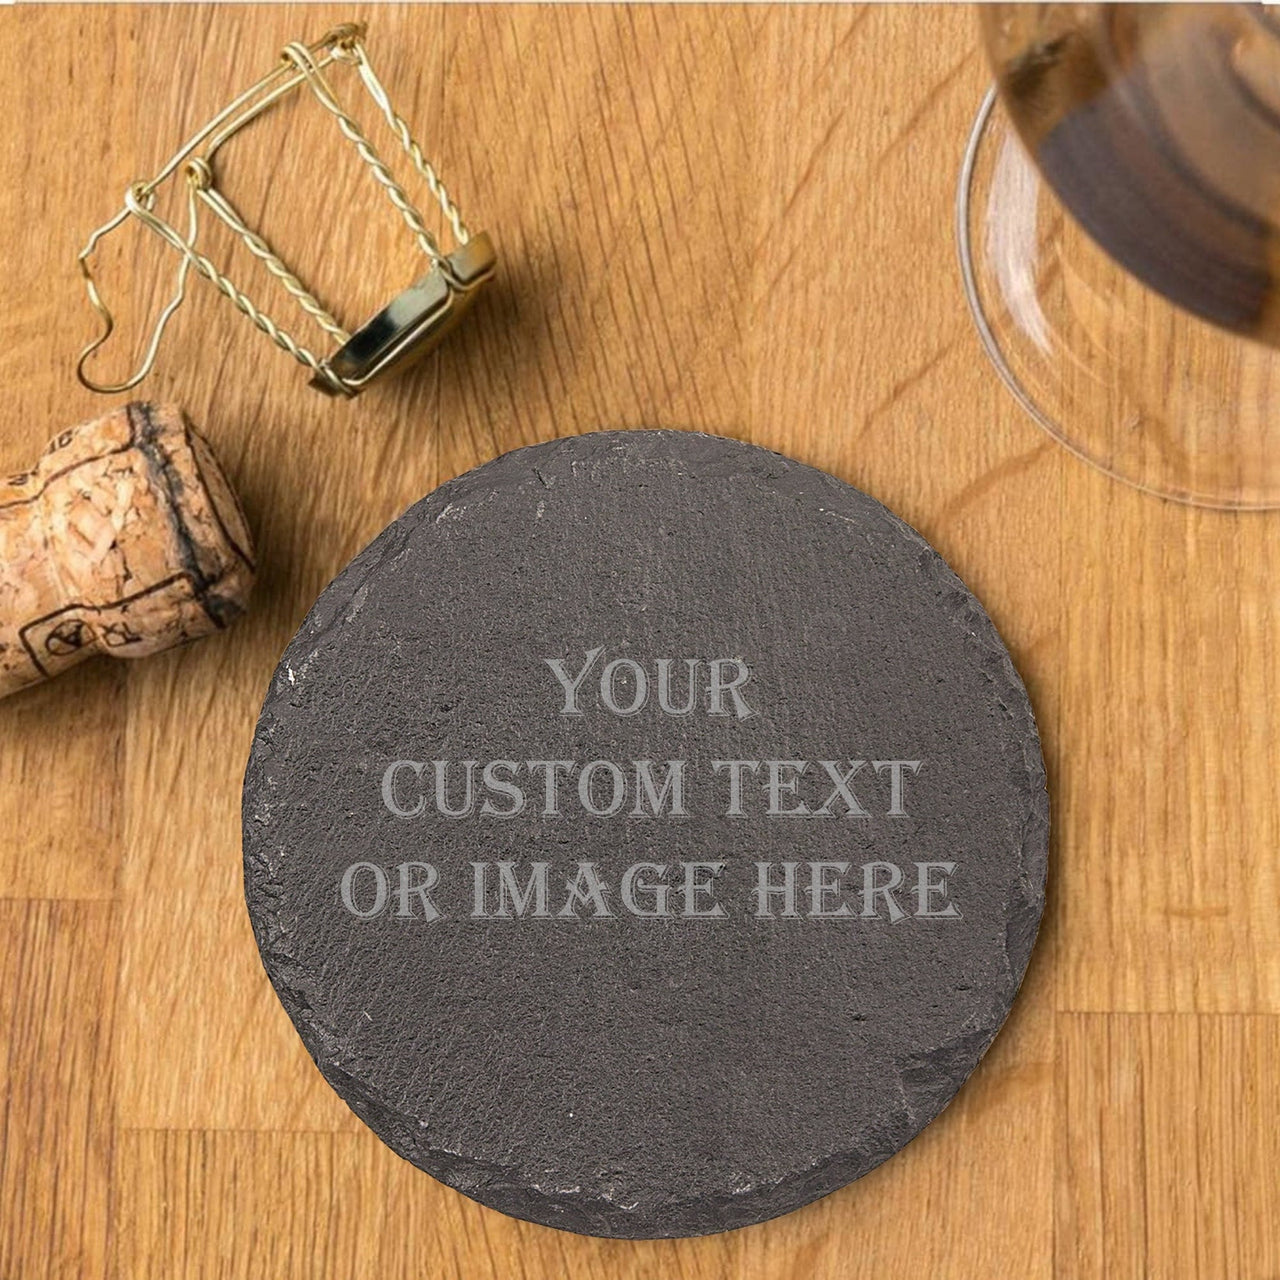 Drink Coaster, Premium Custom Slate Coaster, Father's Day Gift for Dad, Husband, Grandpa Alcohol Drinker Gift, Personalized Slate Coasters